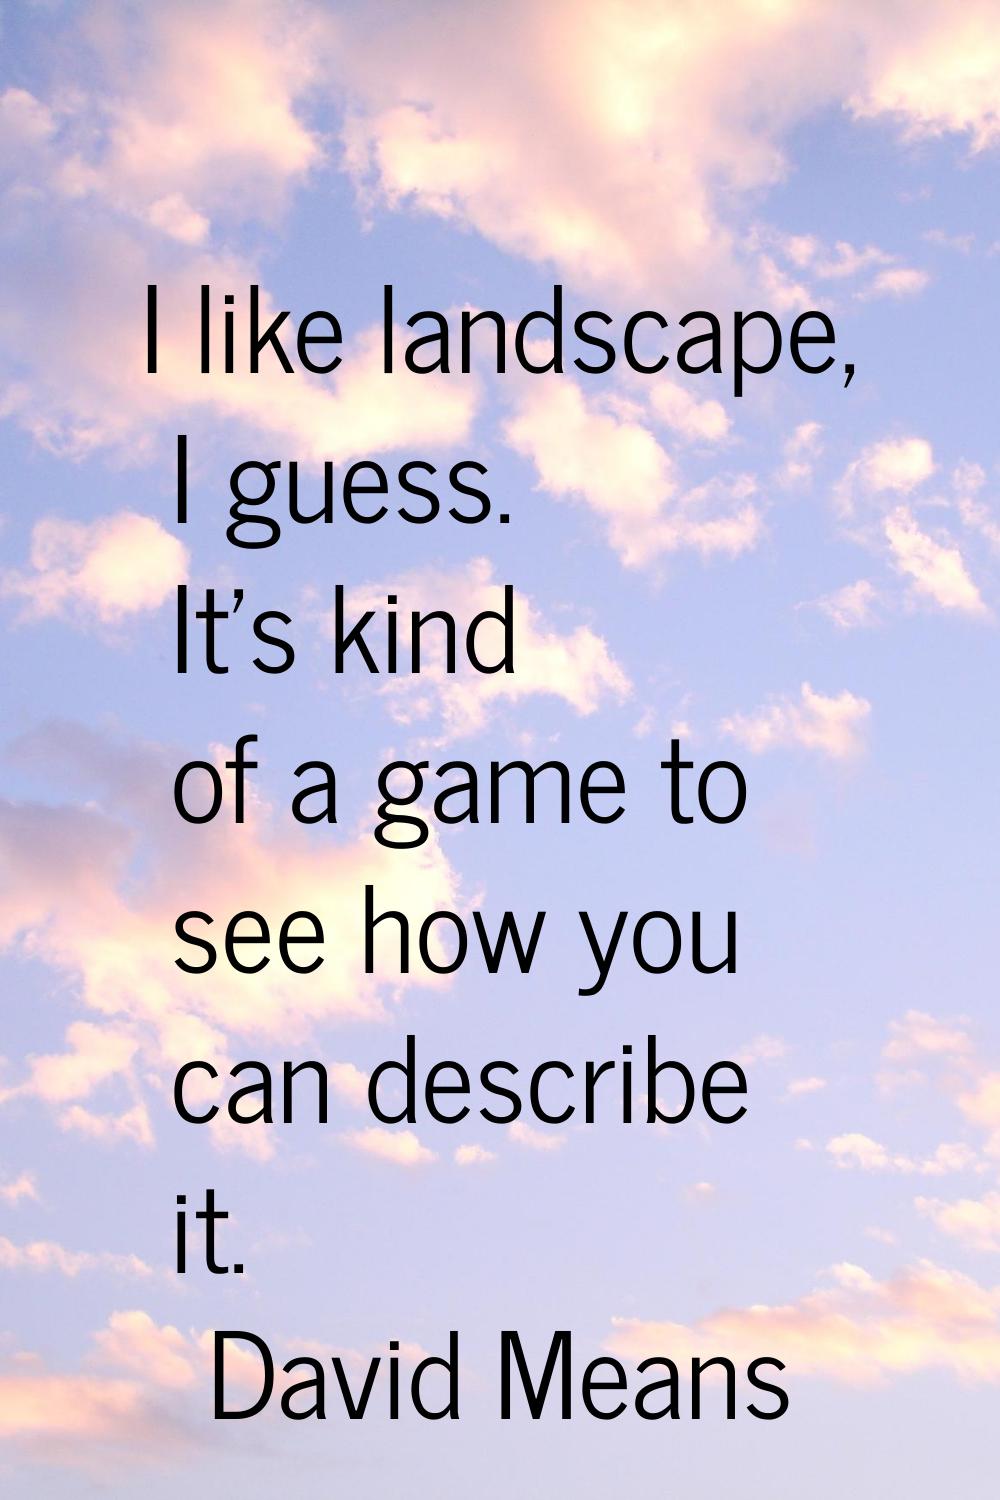 I like landscape, I guess. It's kind of a game to see how you can describe it.